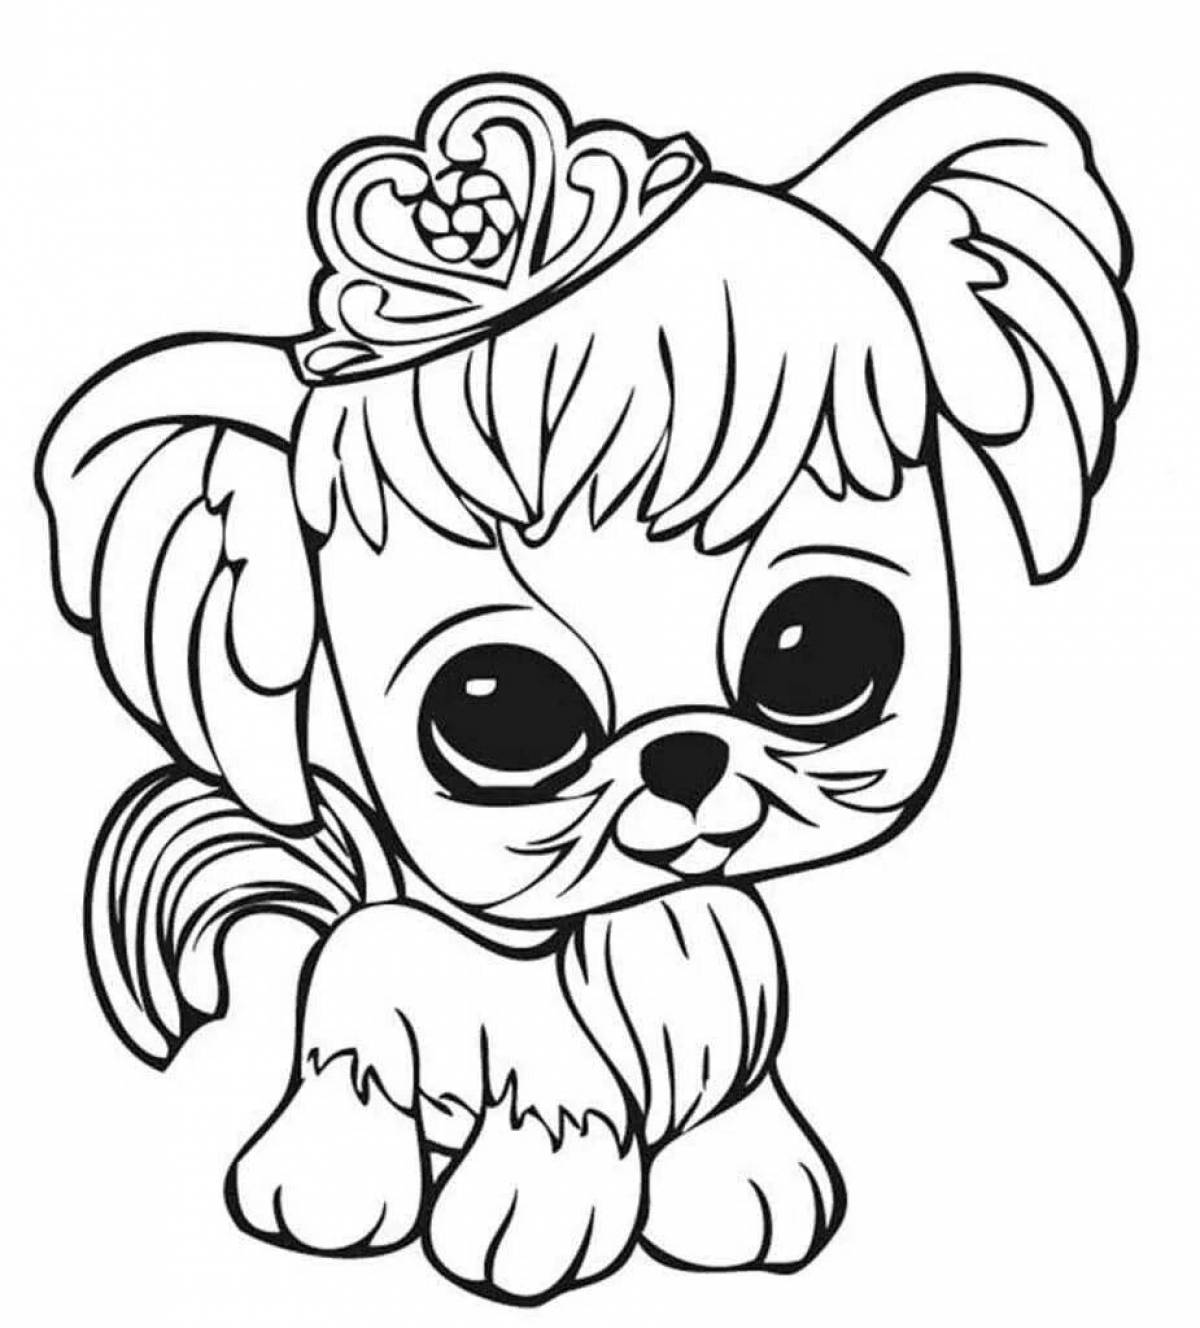 Coloring page inquisitive cute dog